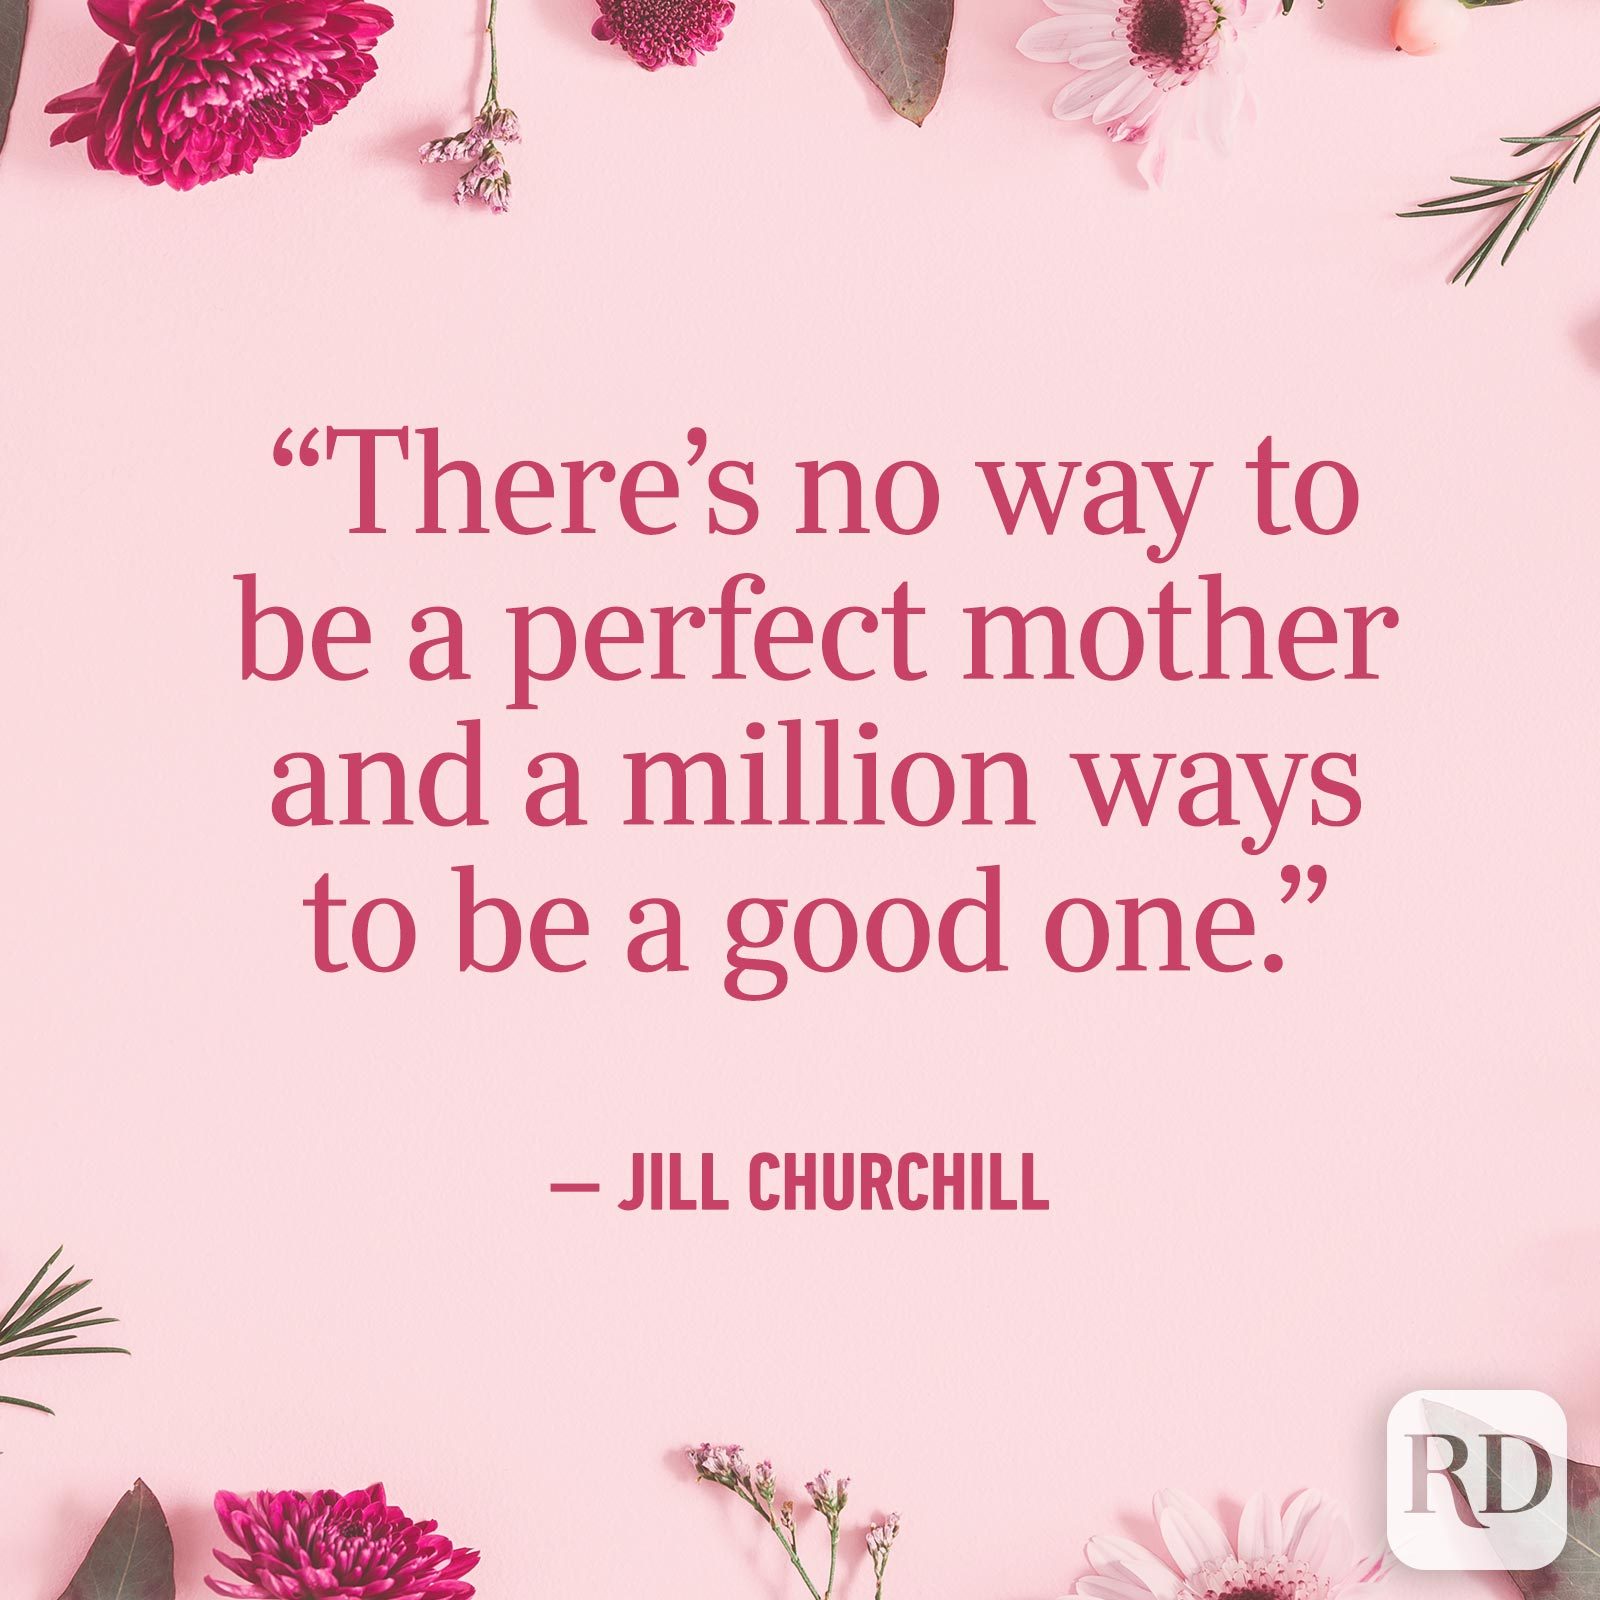 40 Mother's Day Quotes to Show Mom You Care | Reader's Digest